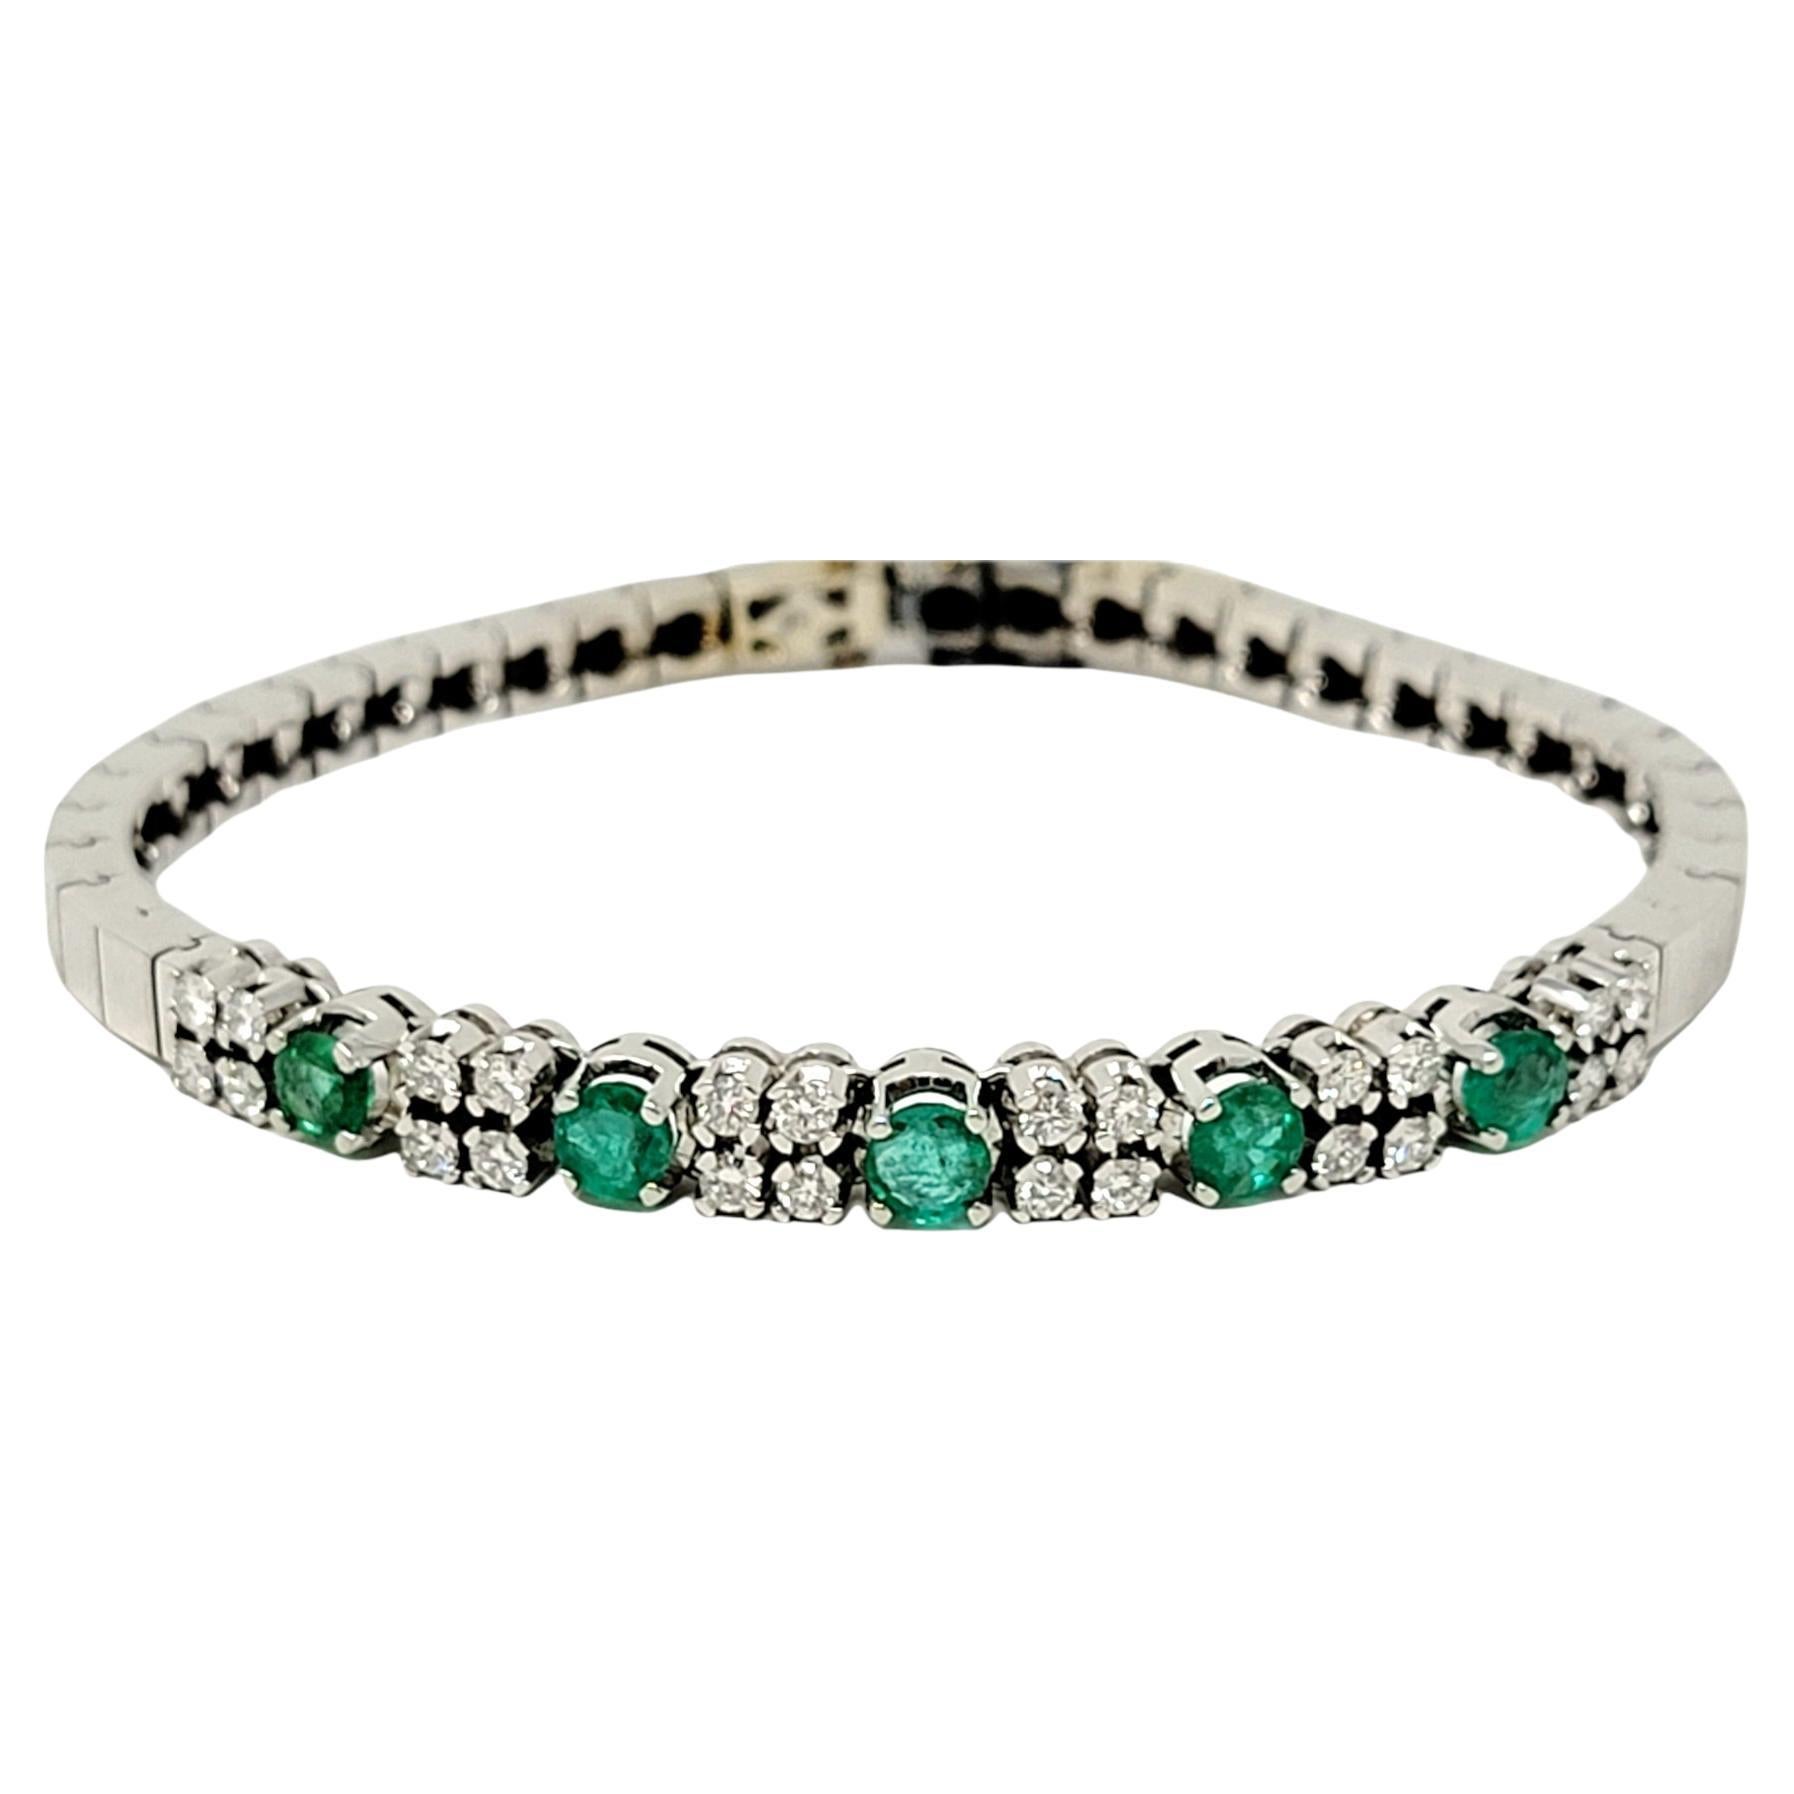 Vibrant green emeralds and sparkling natural diamonds make this stunning bracelet absolutely pop! Lightly textured brushed white gold links surround the beautiful center focal point of glittering gemstones, while the flexible style comfortably wraps